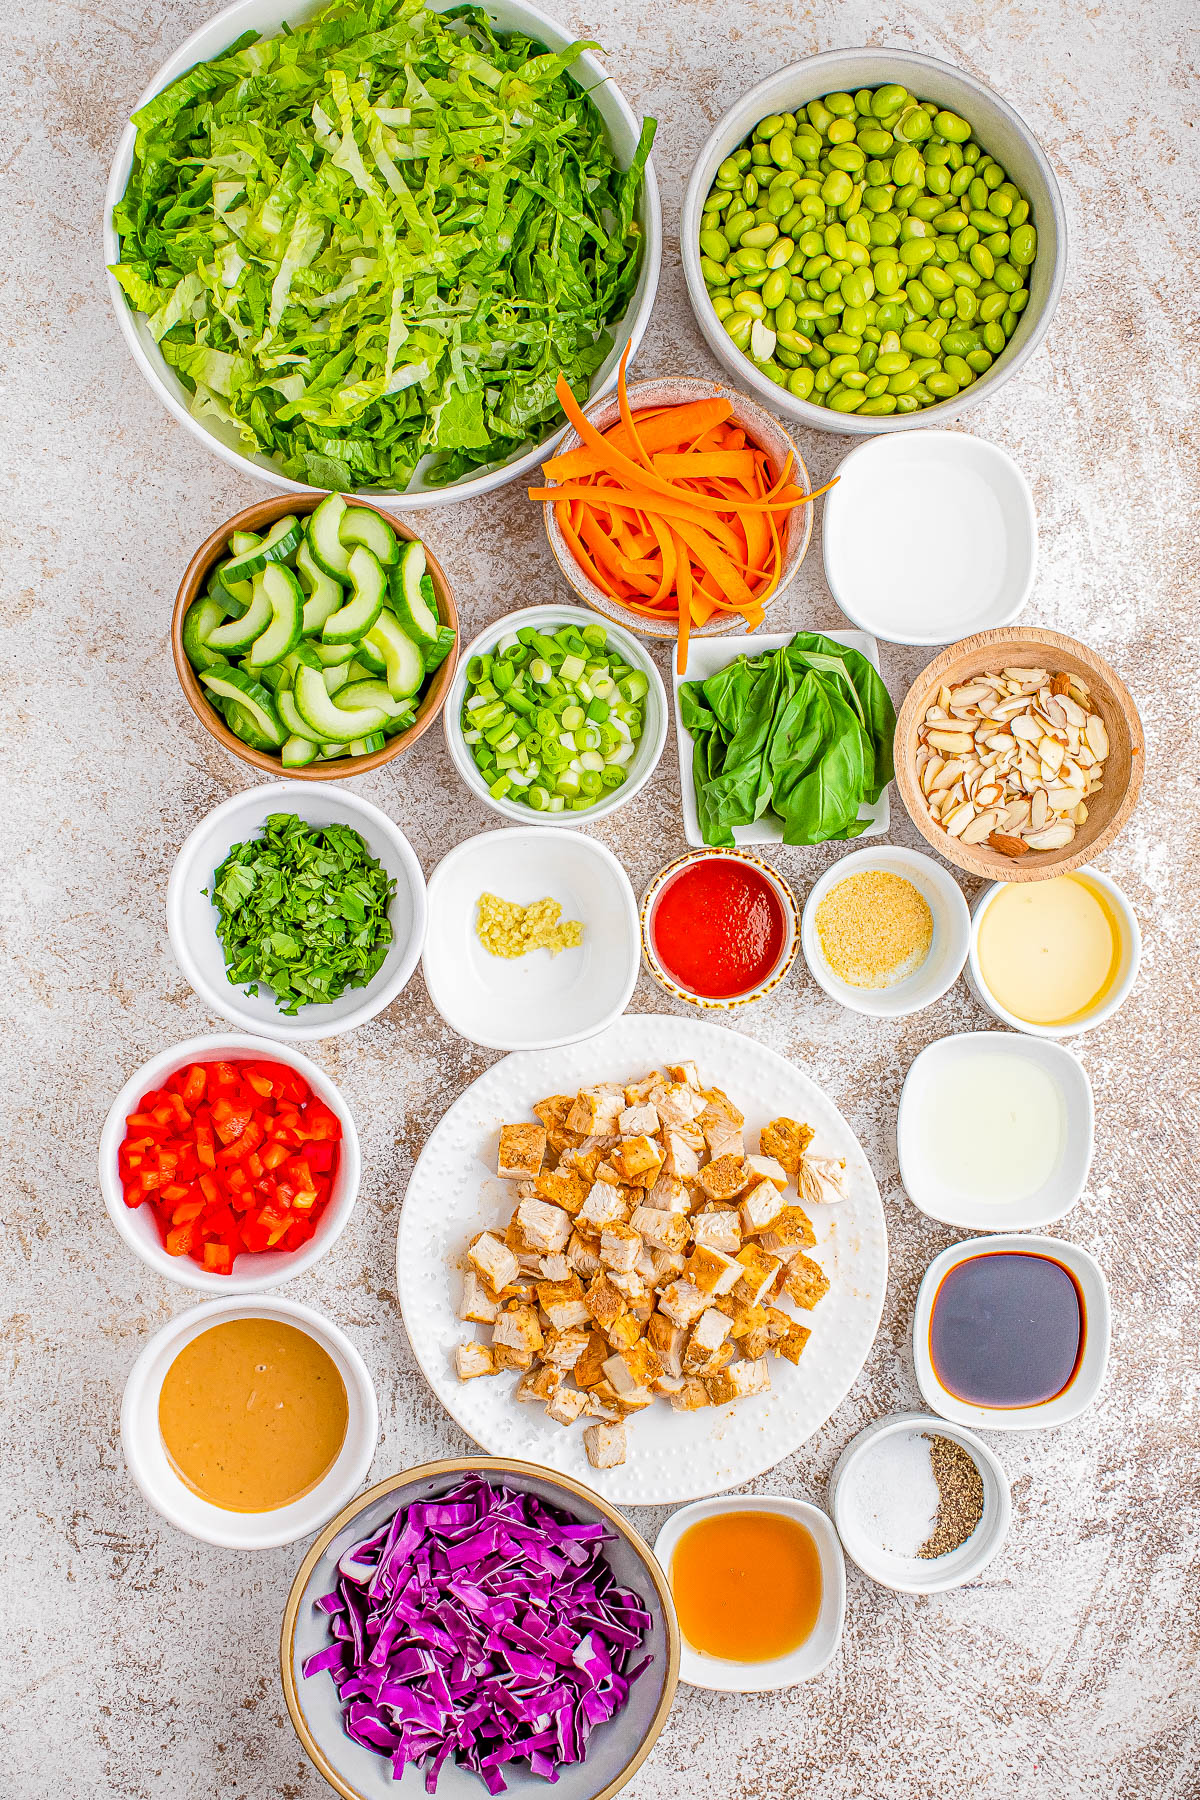 An assortment of vegetables, tofu, and condiments are arranged in small bowls. The ingredients include lettuce, edamame, carrots, cucumbers, bell peppers, purple cabbage, various sauces, and seasonings.